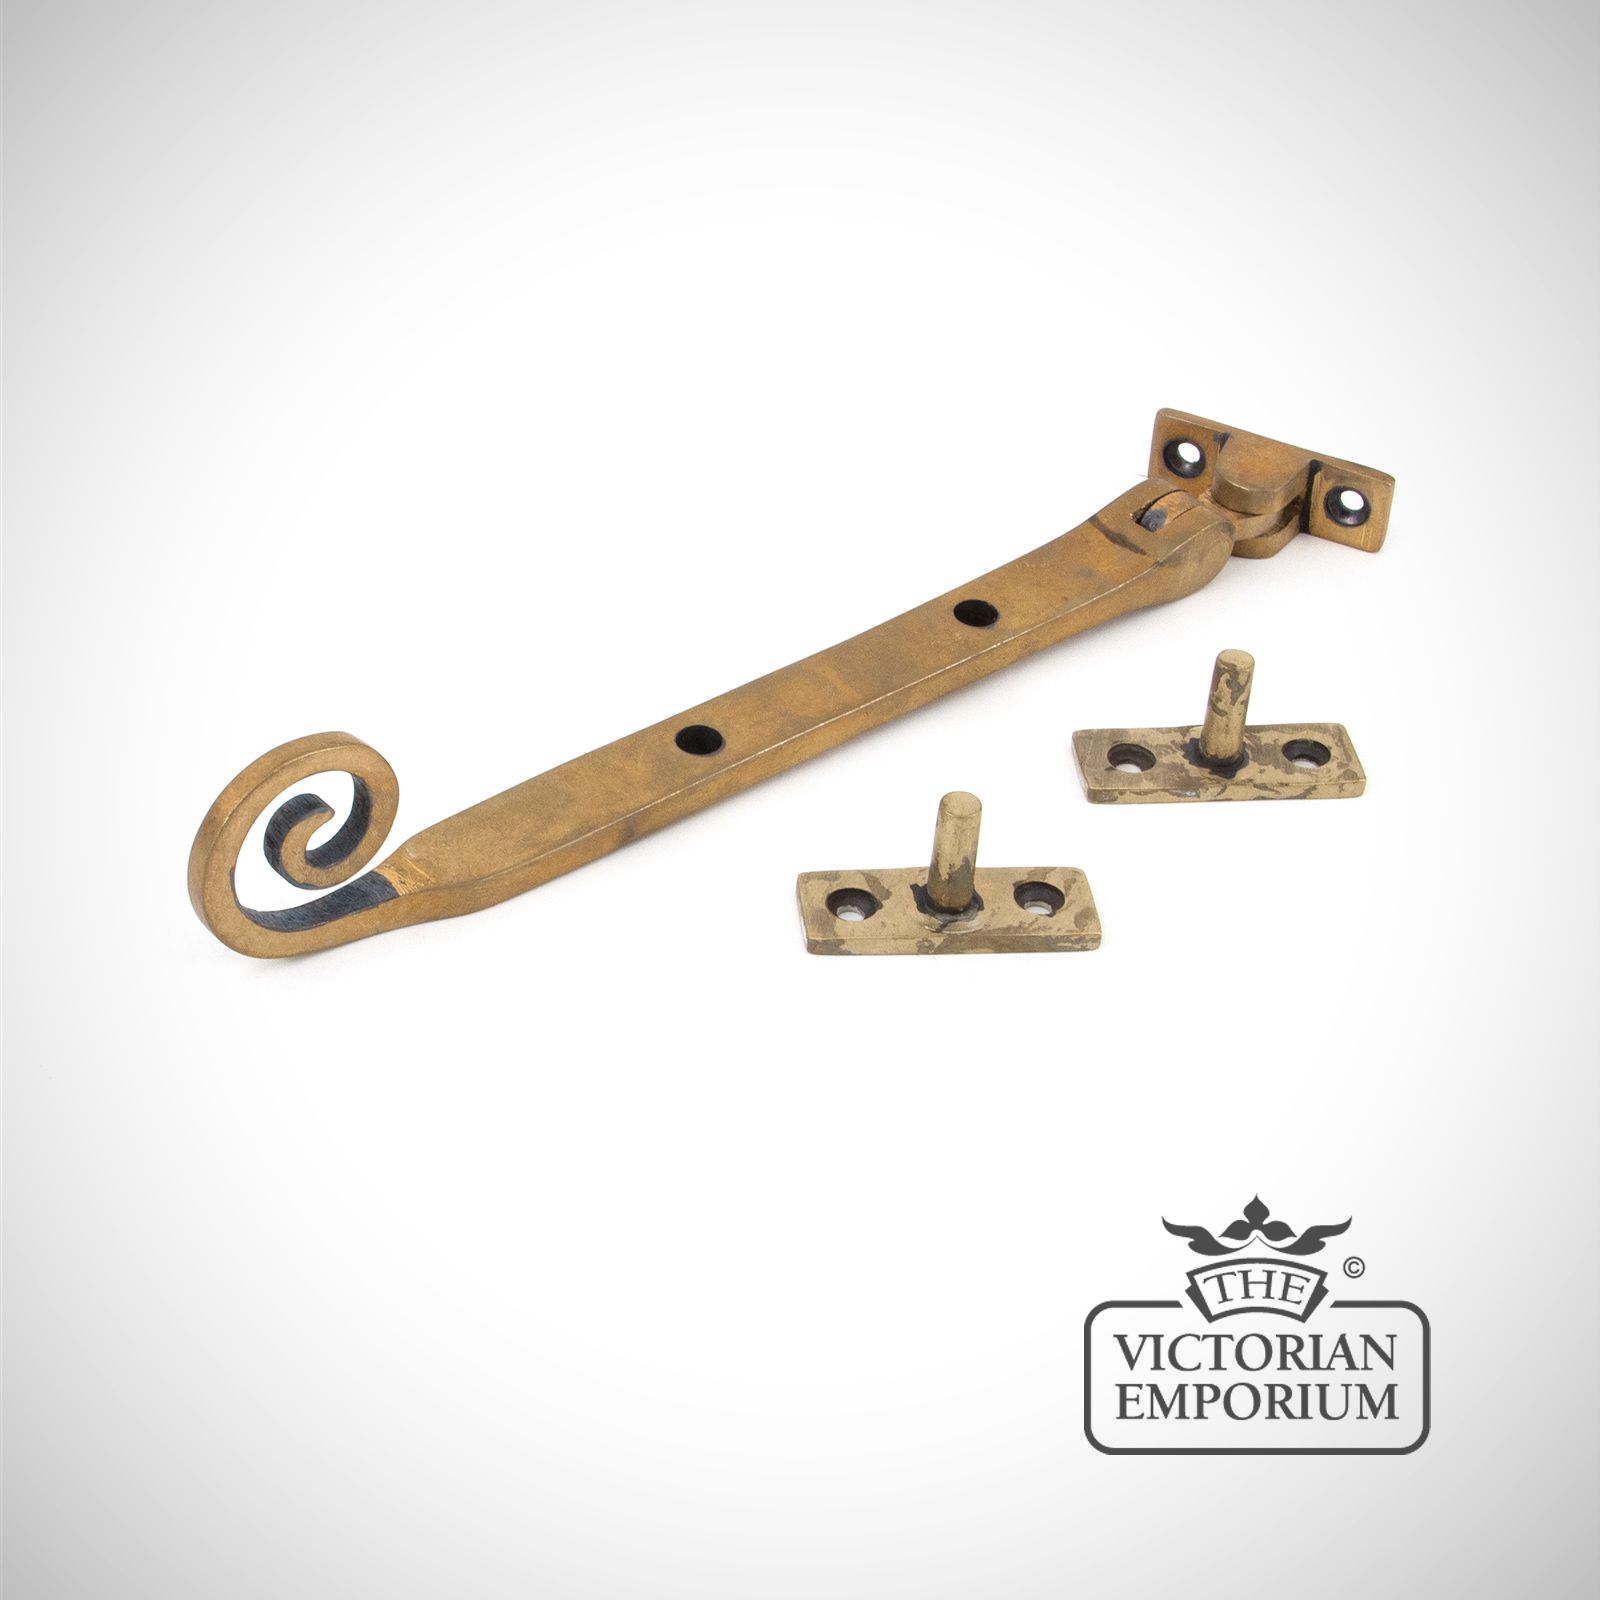 Aged Brass Monkeytail Stay in a choice of 3 sizes - 8”, 10”, 12”